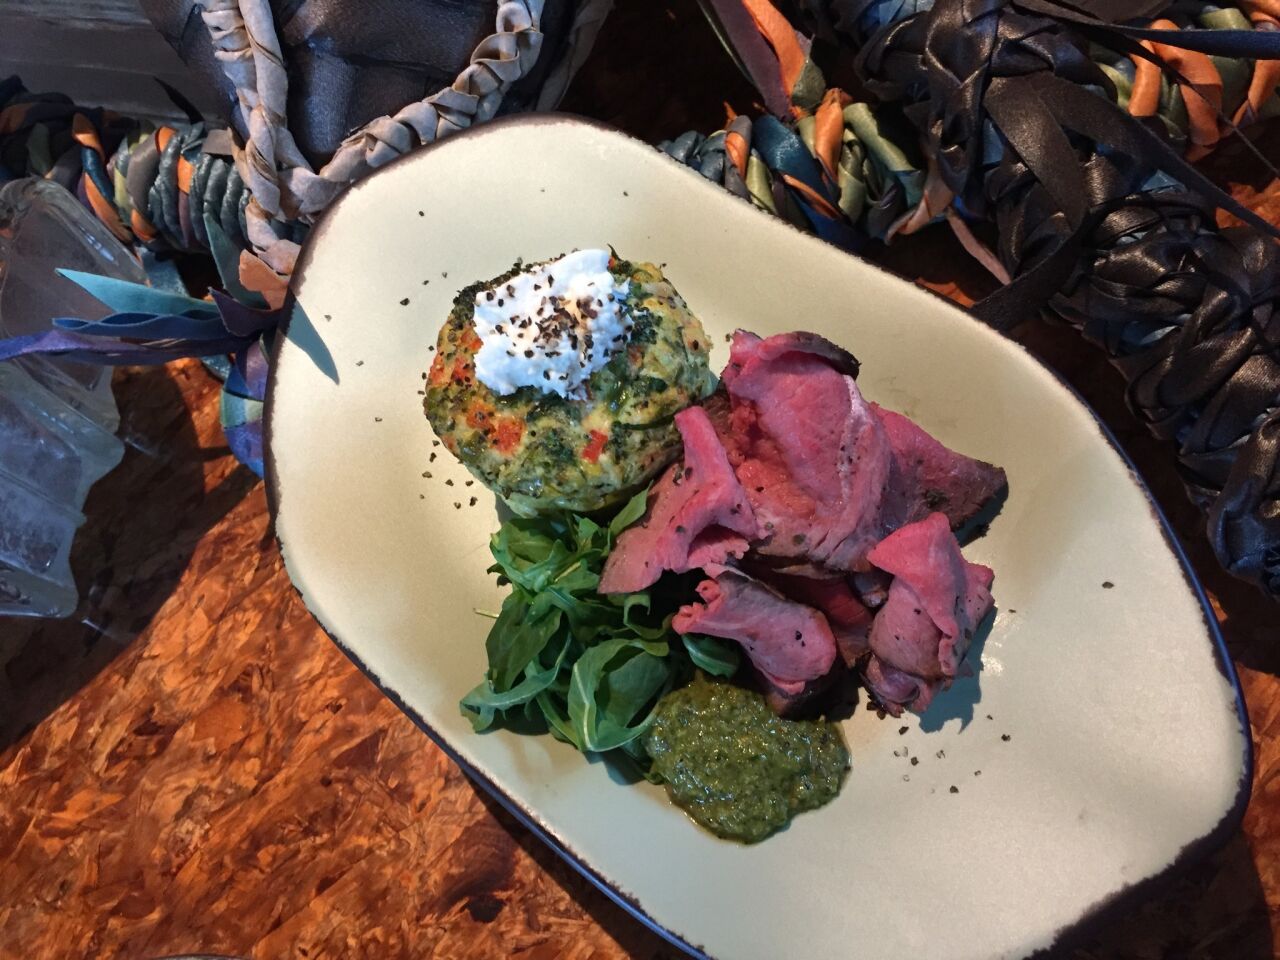 Satu'li Canteen, a restaurant within Pandora, includes vegetable-goat cheese fritatta with wood-fired, herb-crusted beef and chimichurri on its breakfast menu.